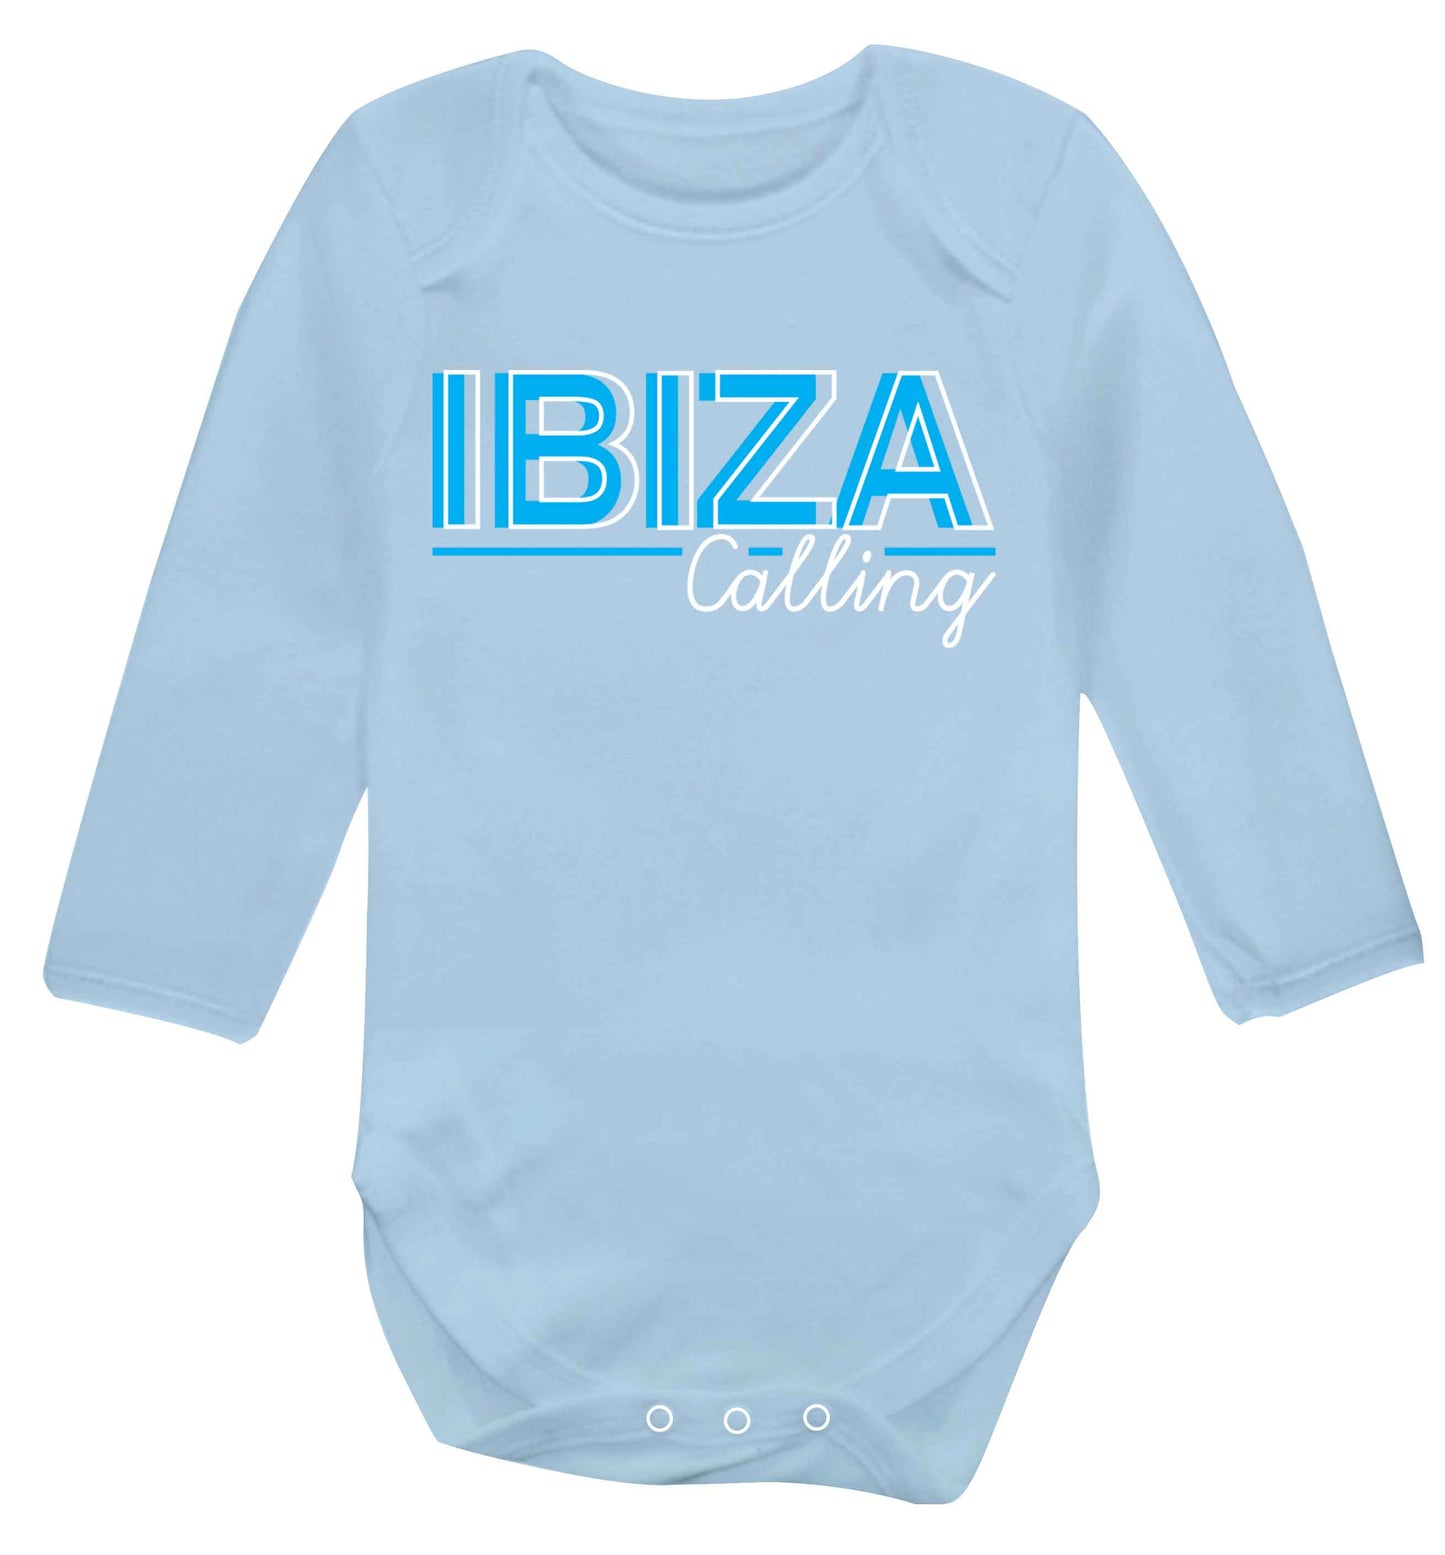 Ibiza calling Baby Vest long sleeved pale blue 6-12 months